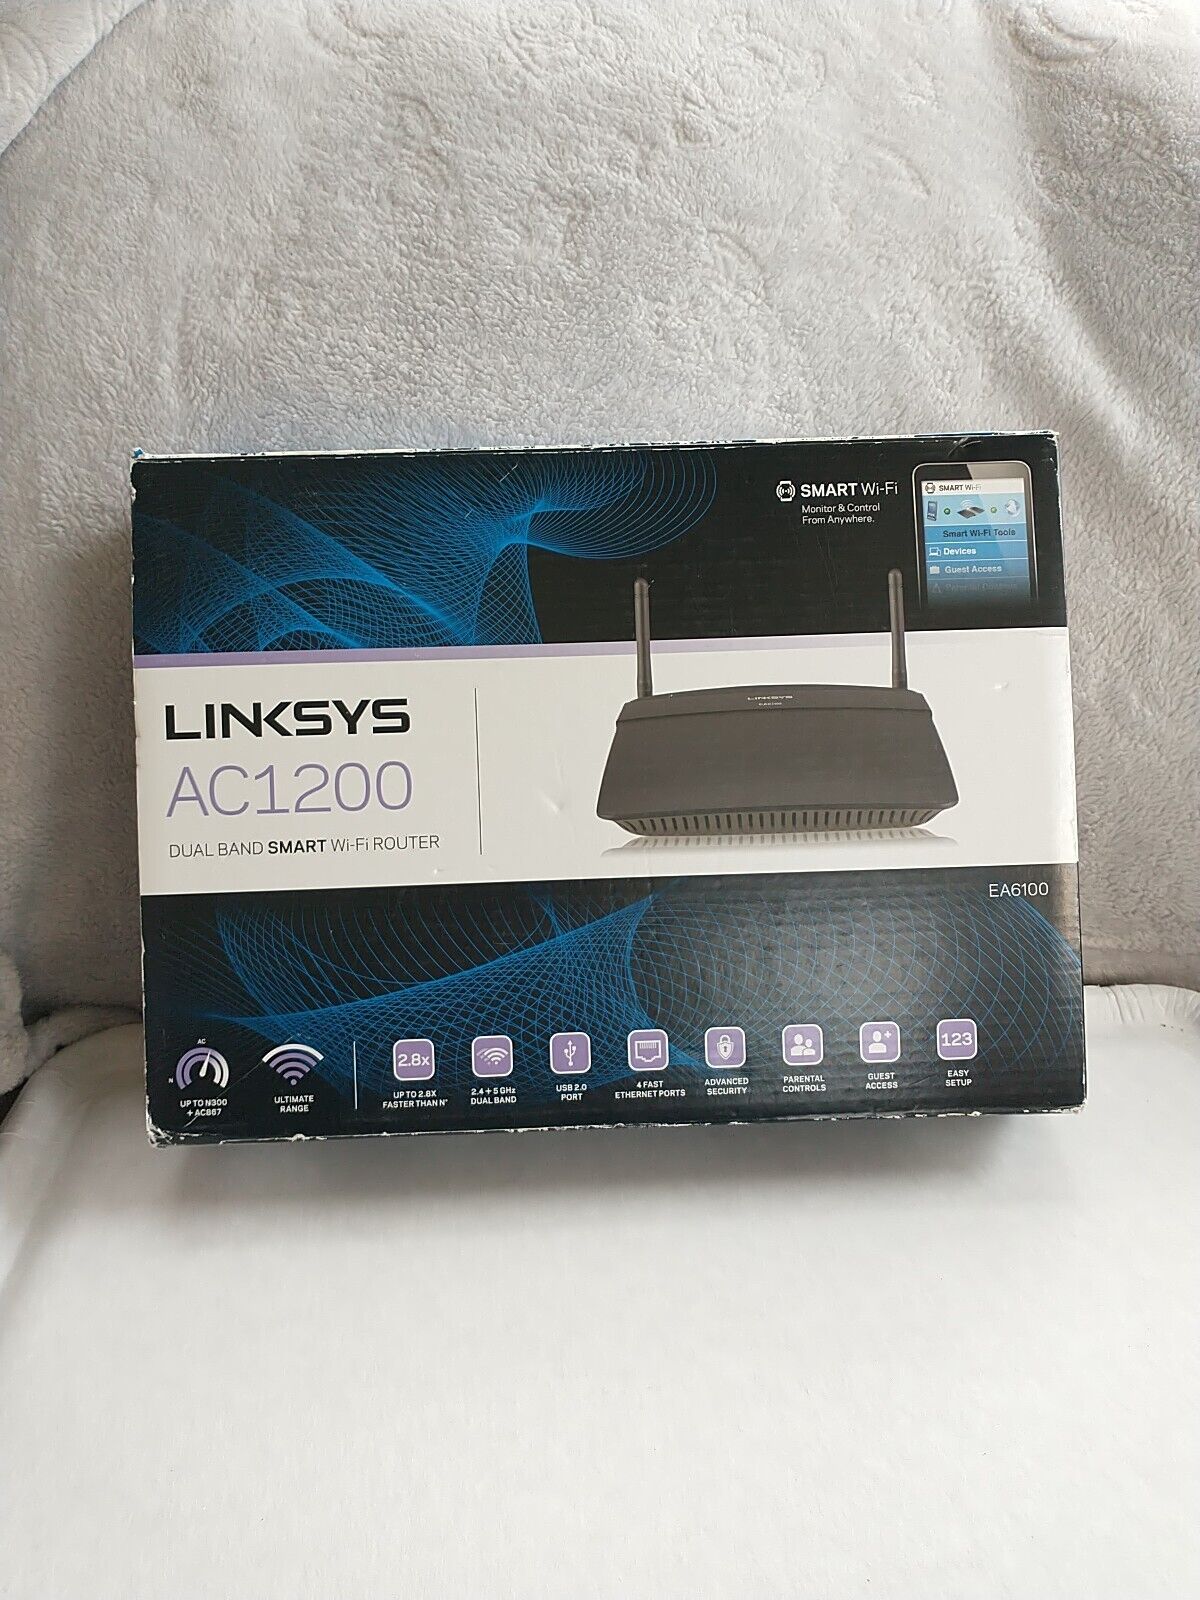 Linksys - AC1200 Router - Model EA6100 - Dual Band Smart Wi-Fi - NEW Open Box